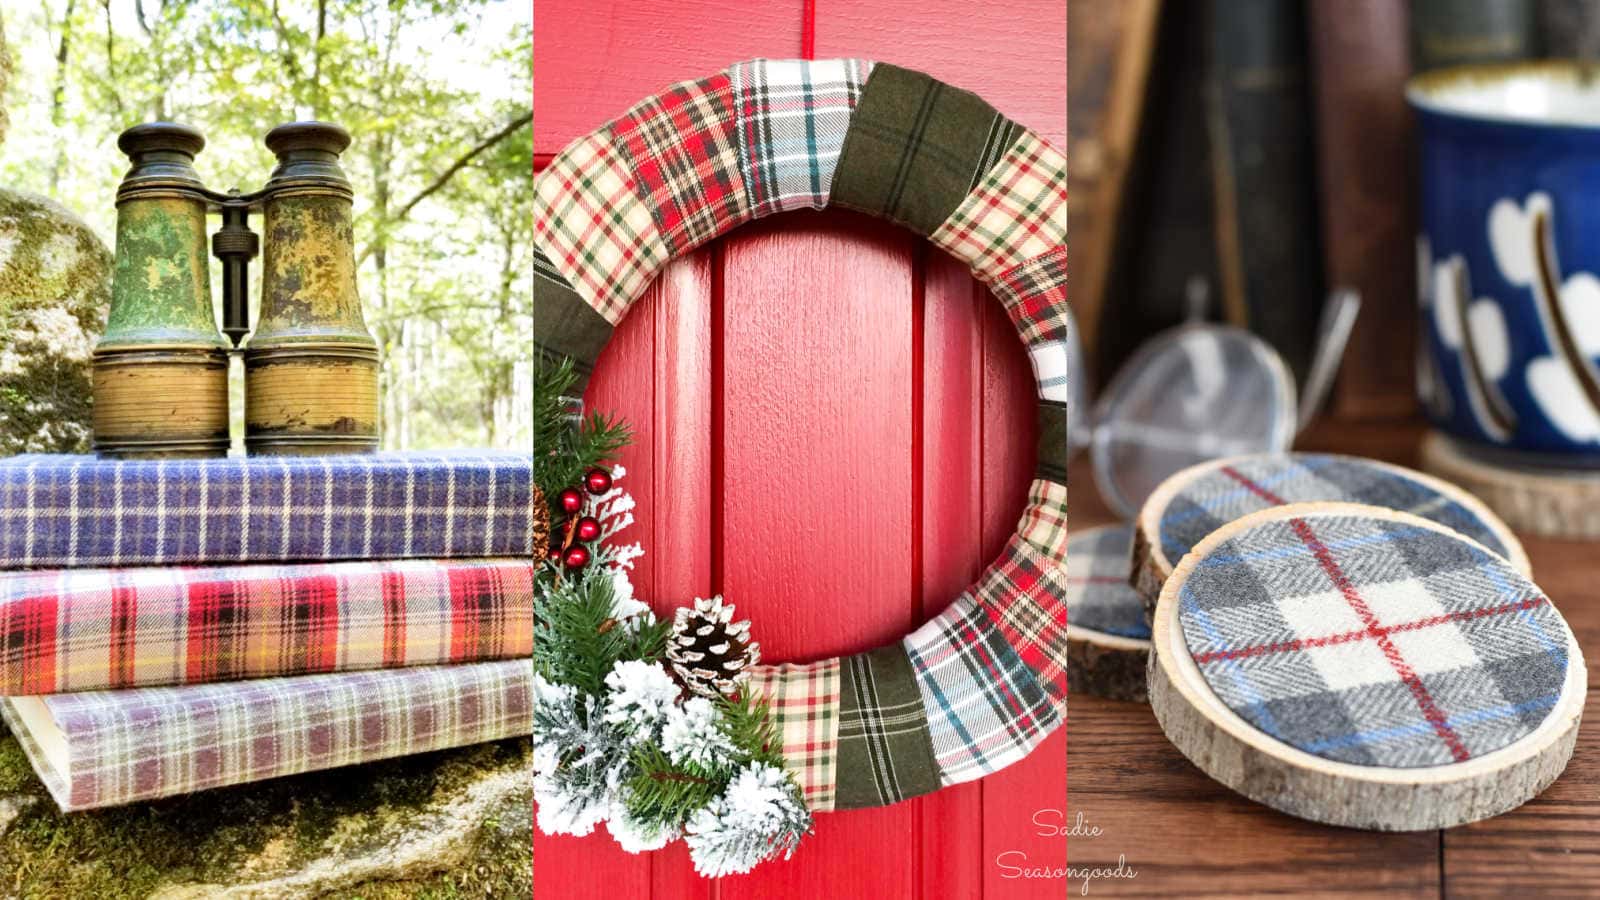 Flannel Decor for a Cozy Home